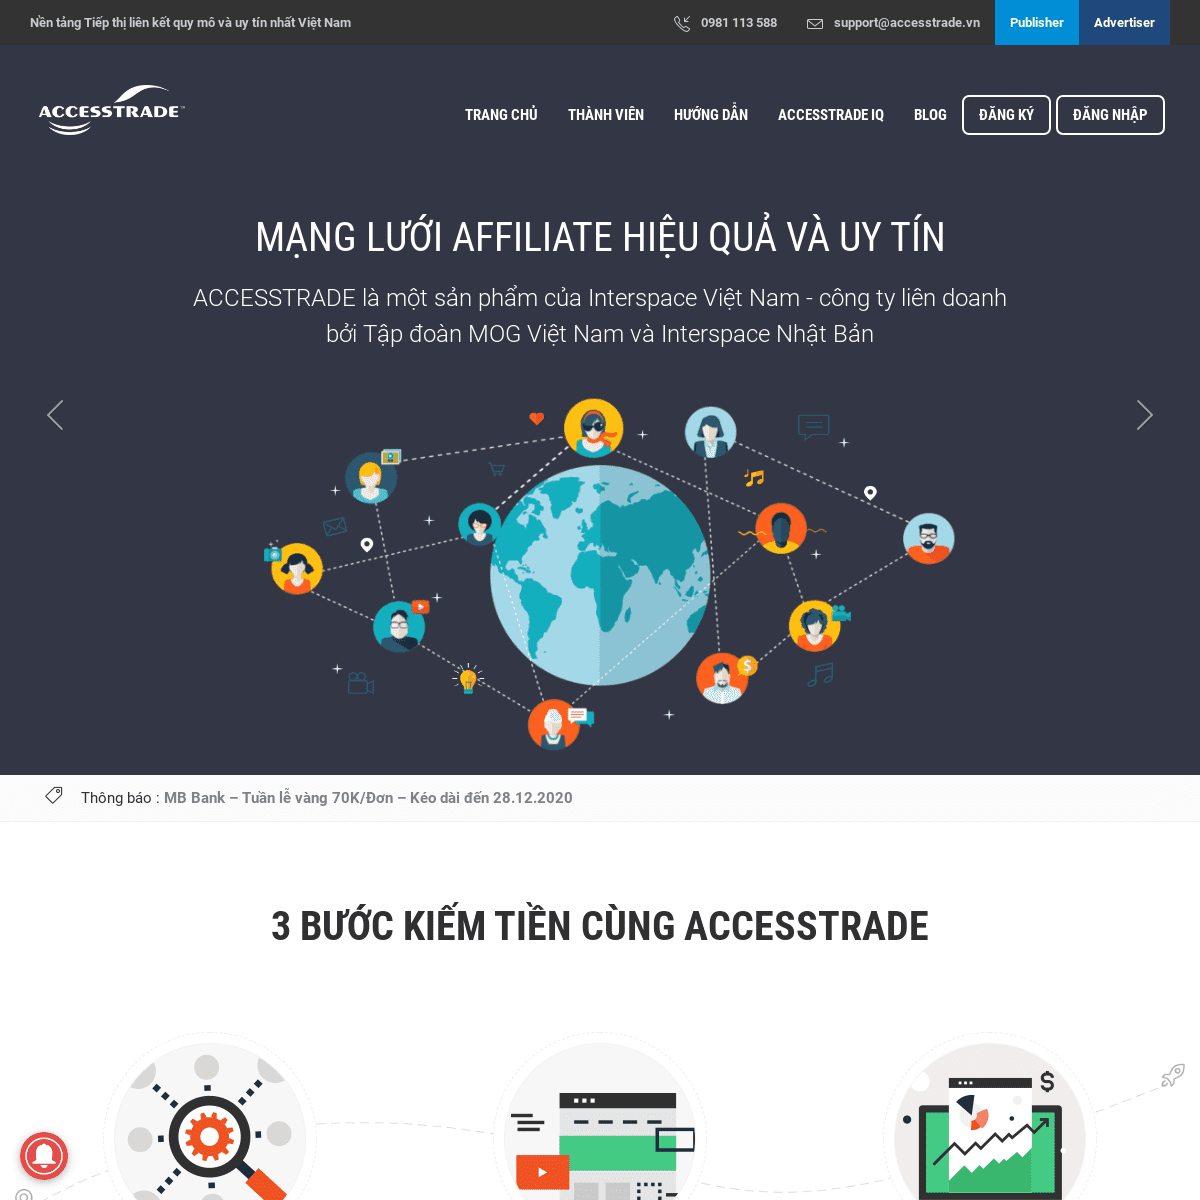 A complete backup of https://accesstrade.vn